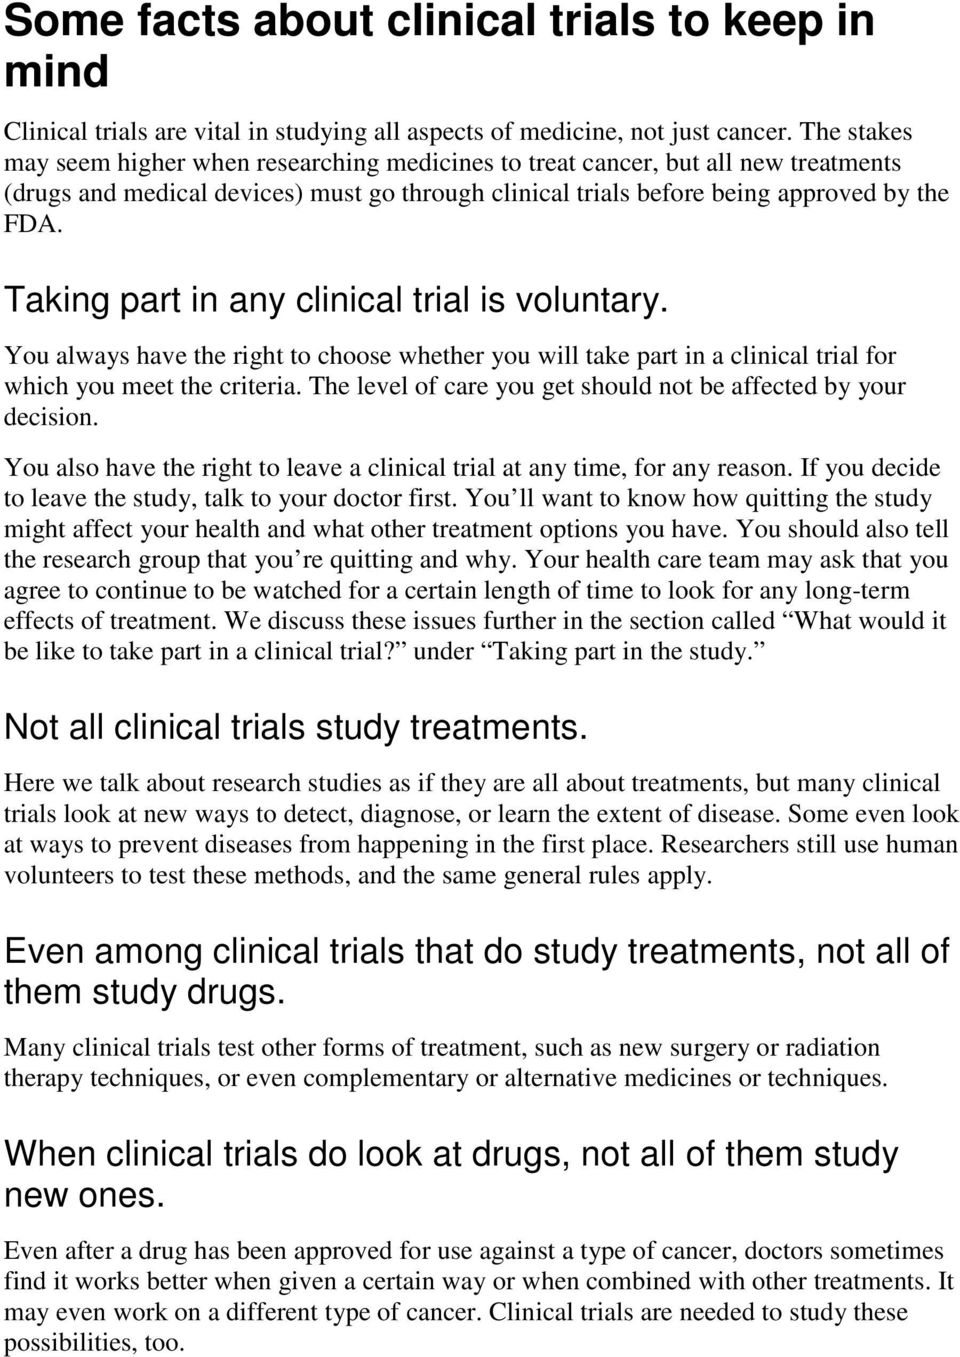 Taking part in any clinical trial is voluntary. You always have the right to choose whether you will take part in a clinical trial for which you meet the criteria.